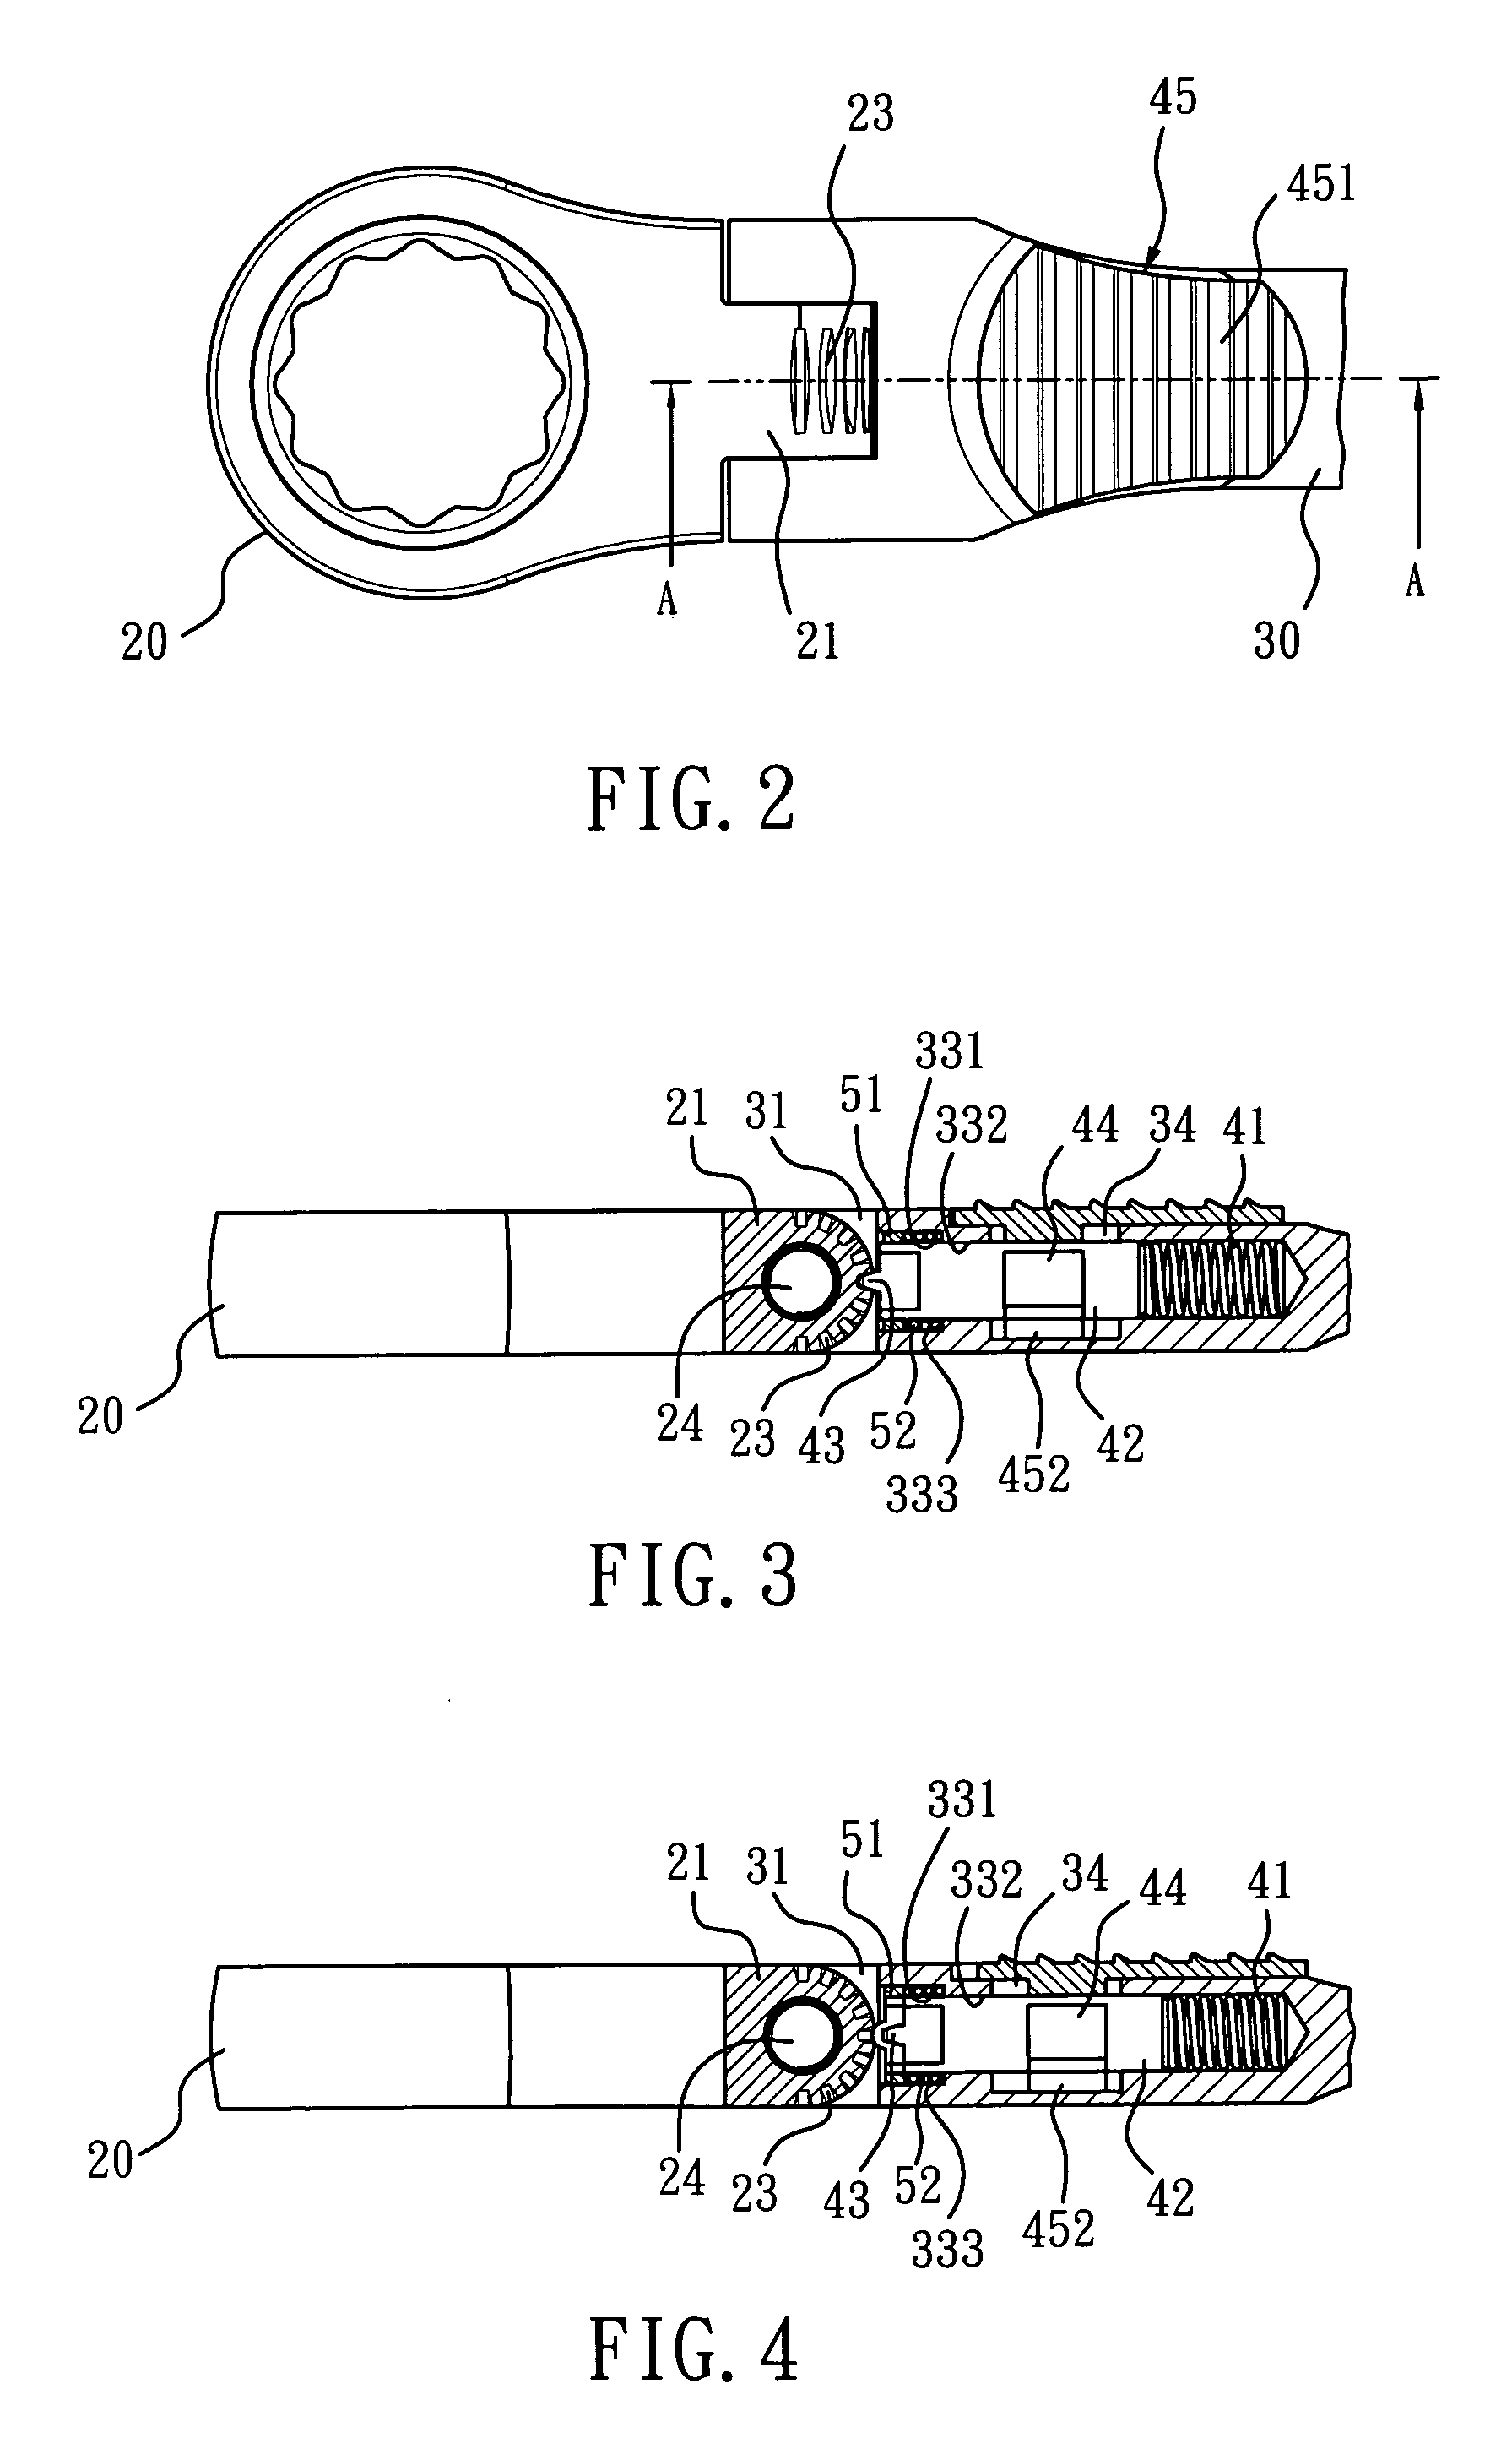 Hand tool having an adjustable head with joint lock mechanism